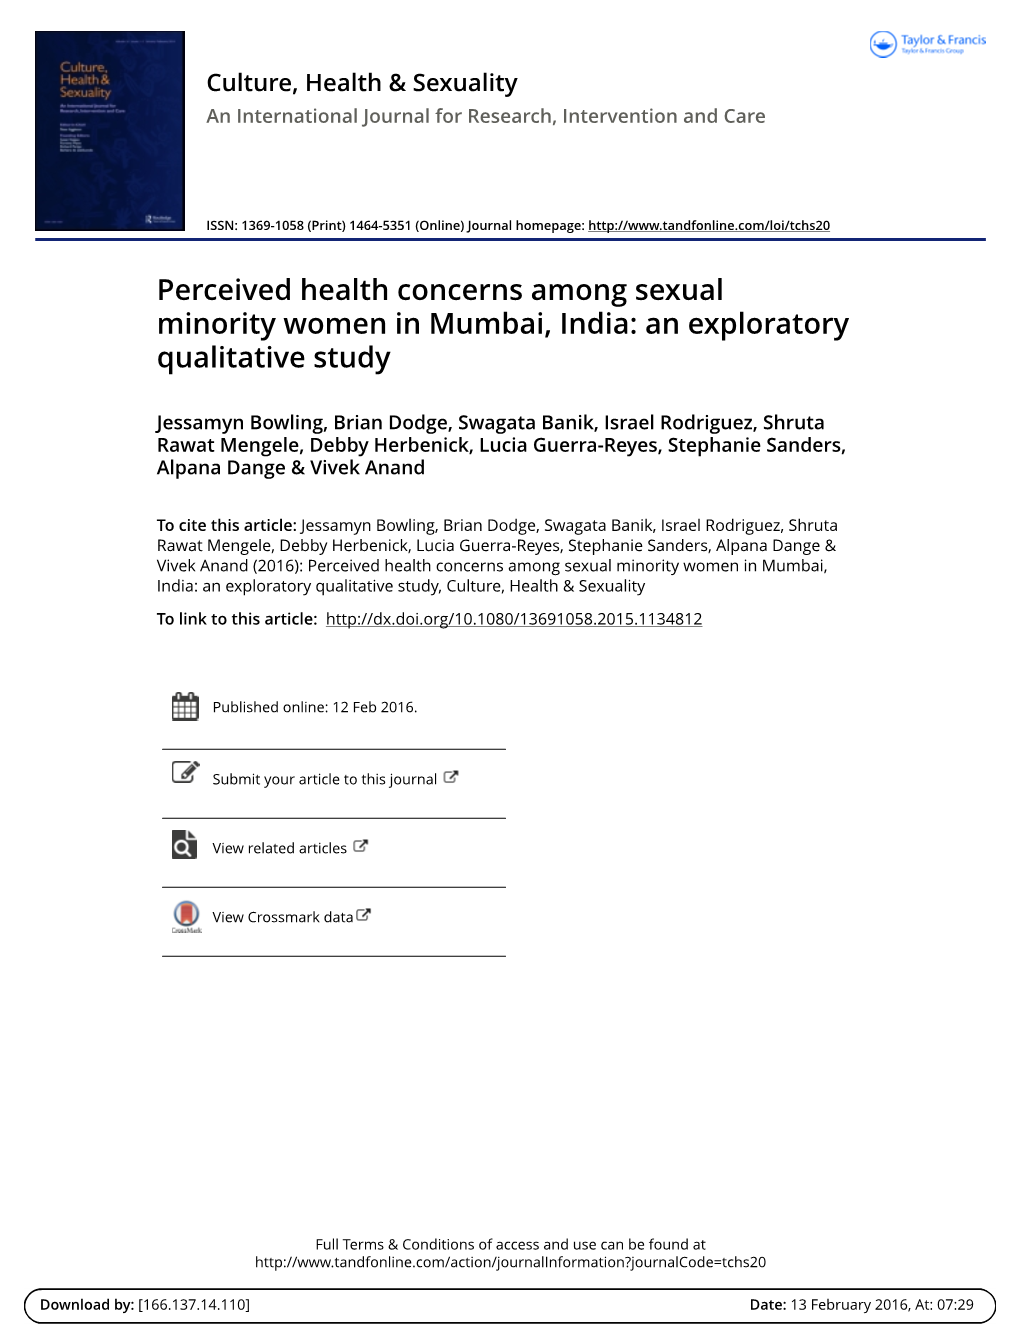 Perceived Health Concerns Among Sexual Minority Women in Mumbai, India: an Exploratory Qualitative Study